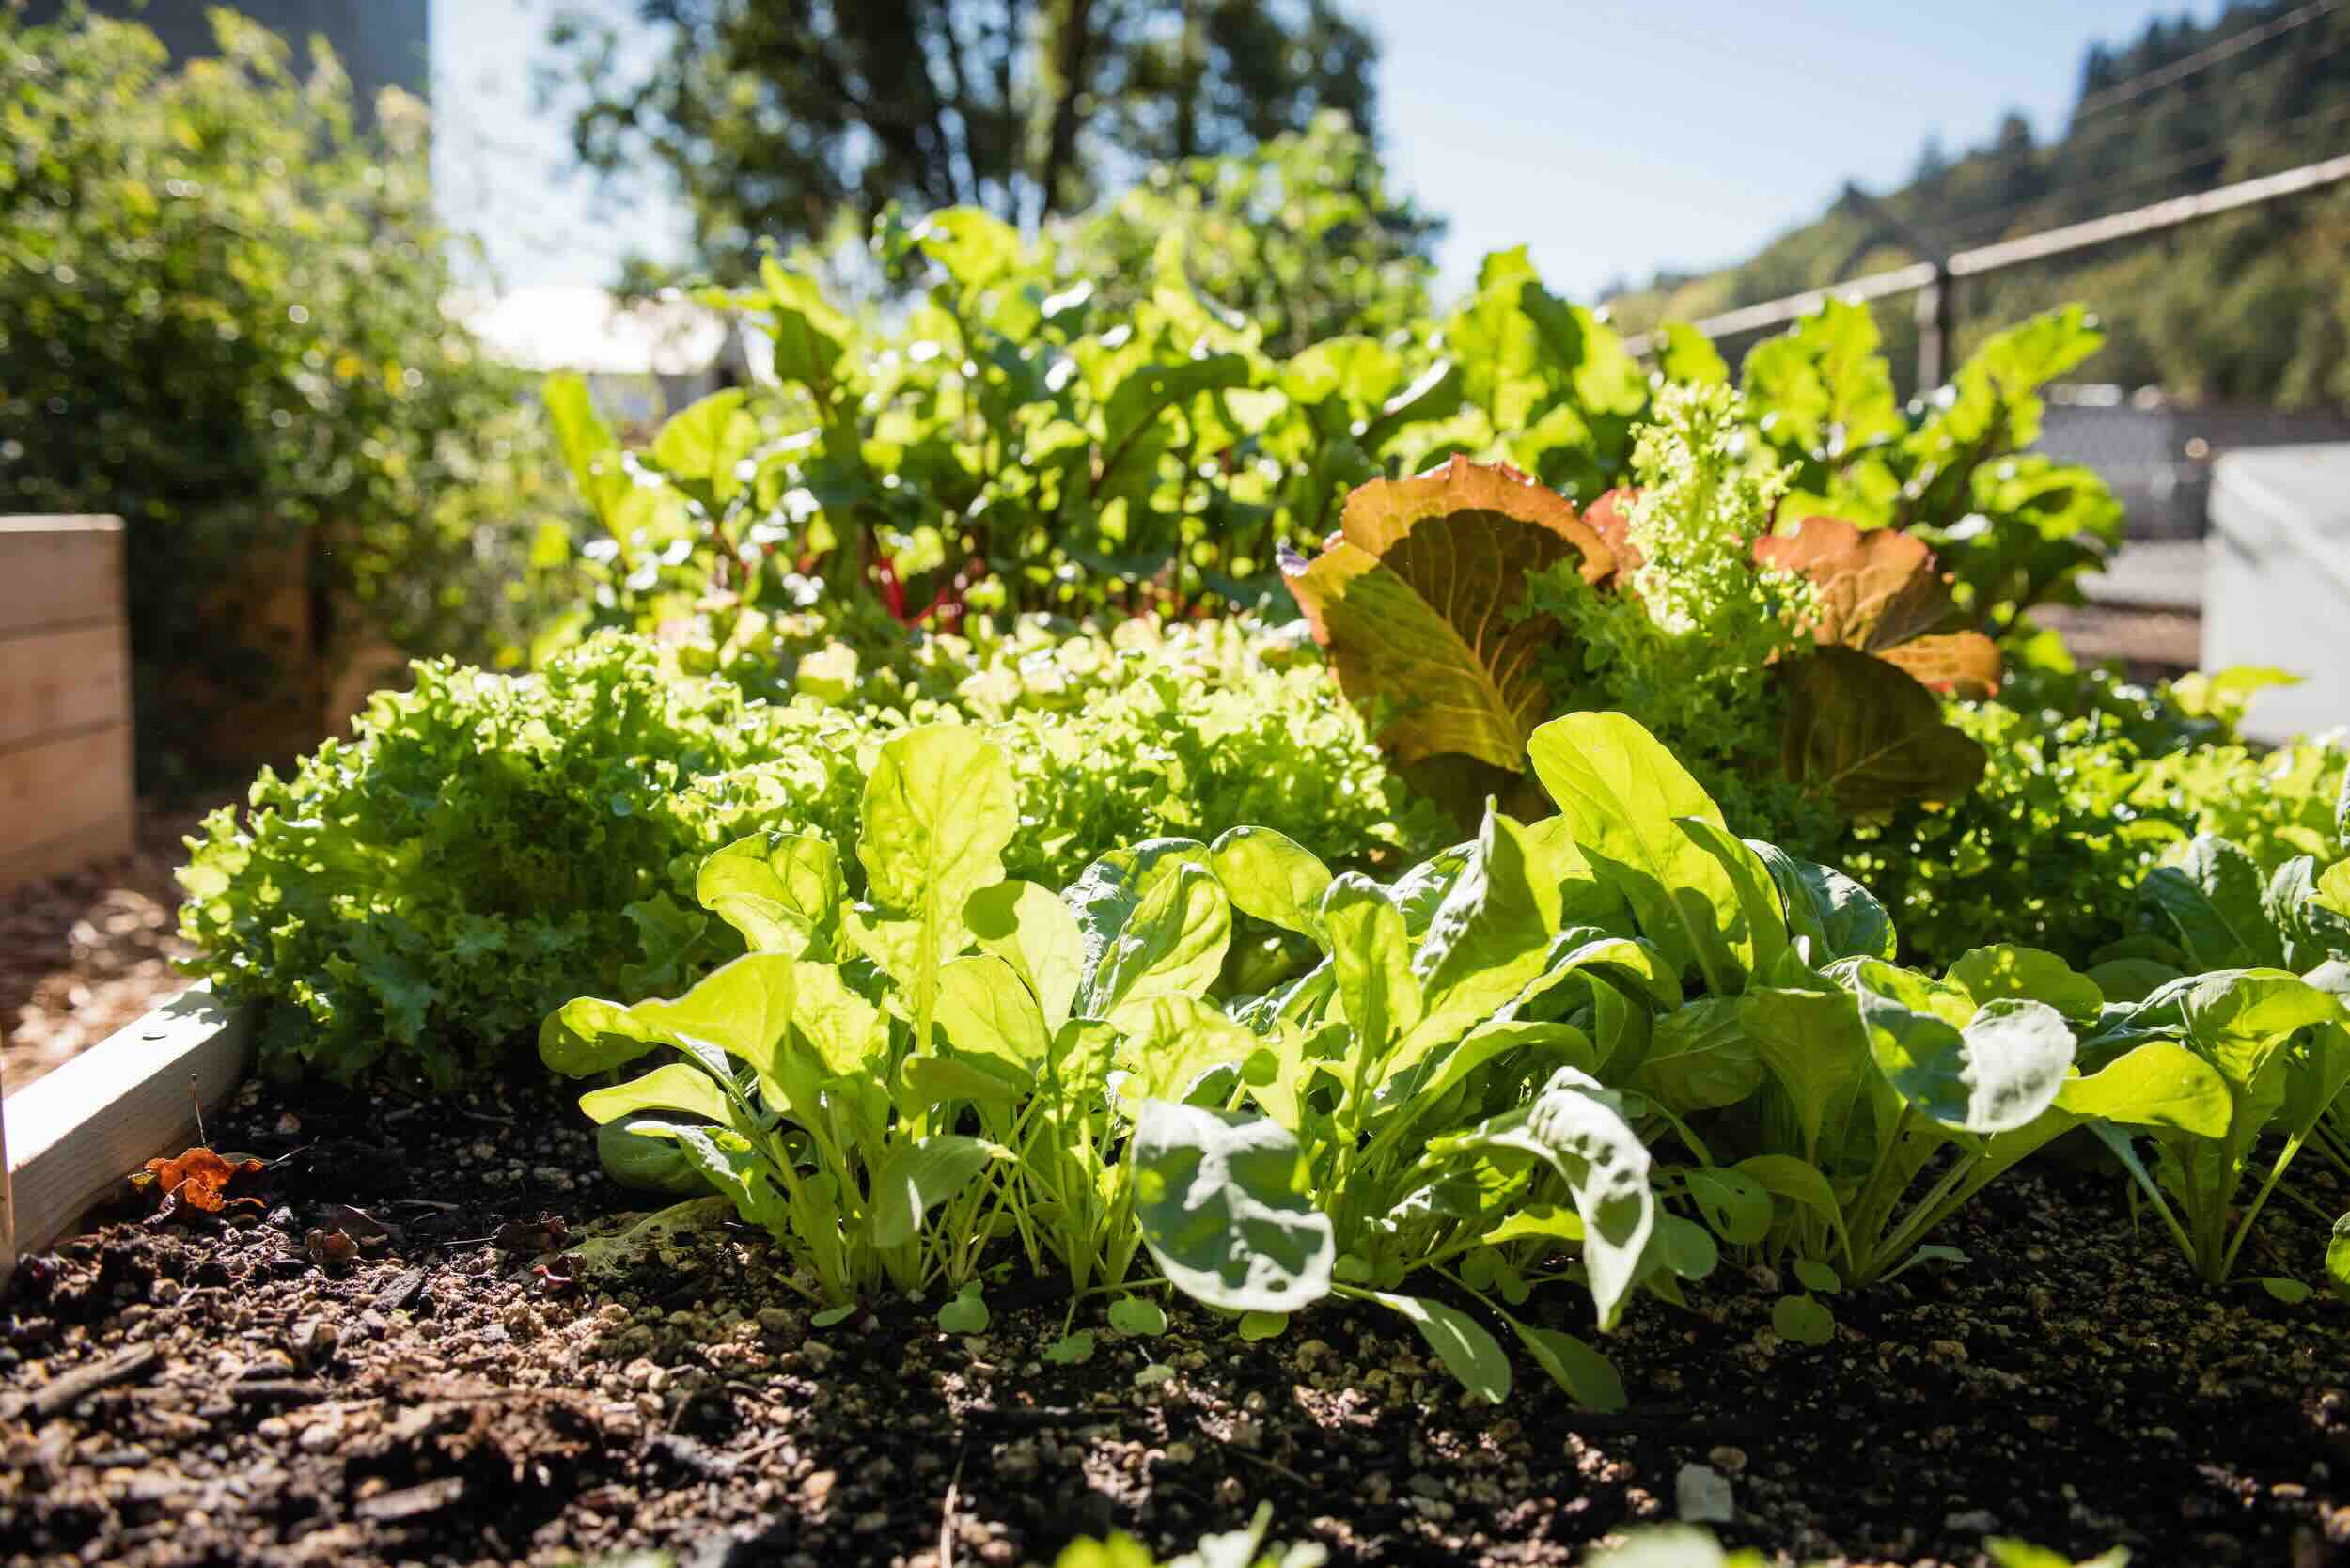 What Vegetables Grow Best In A Raised Garden Bed?